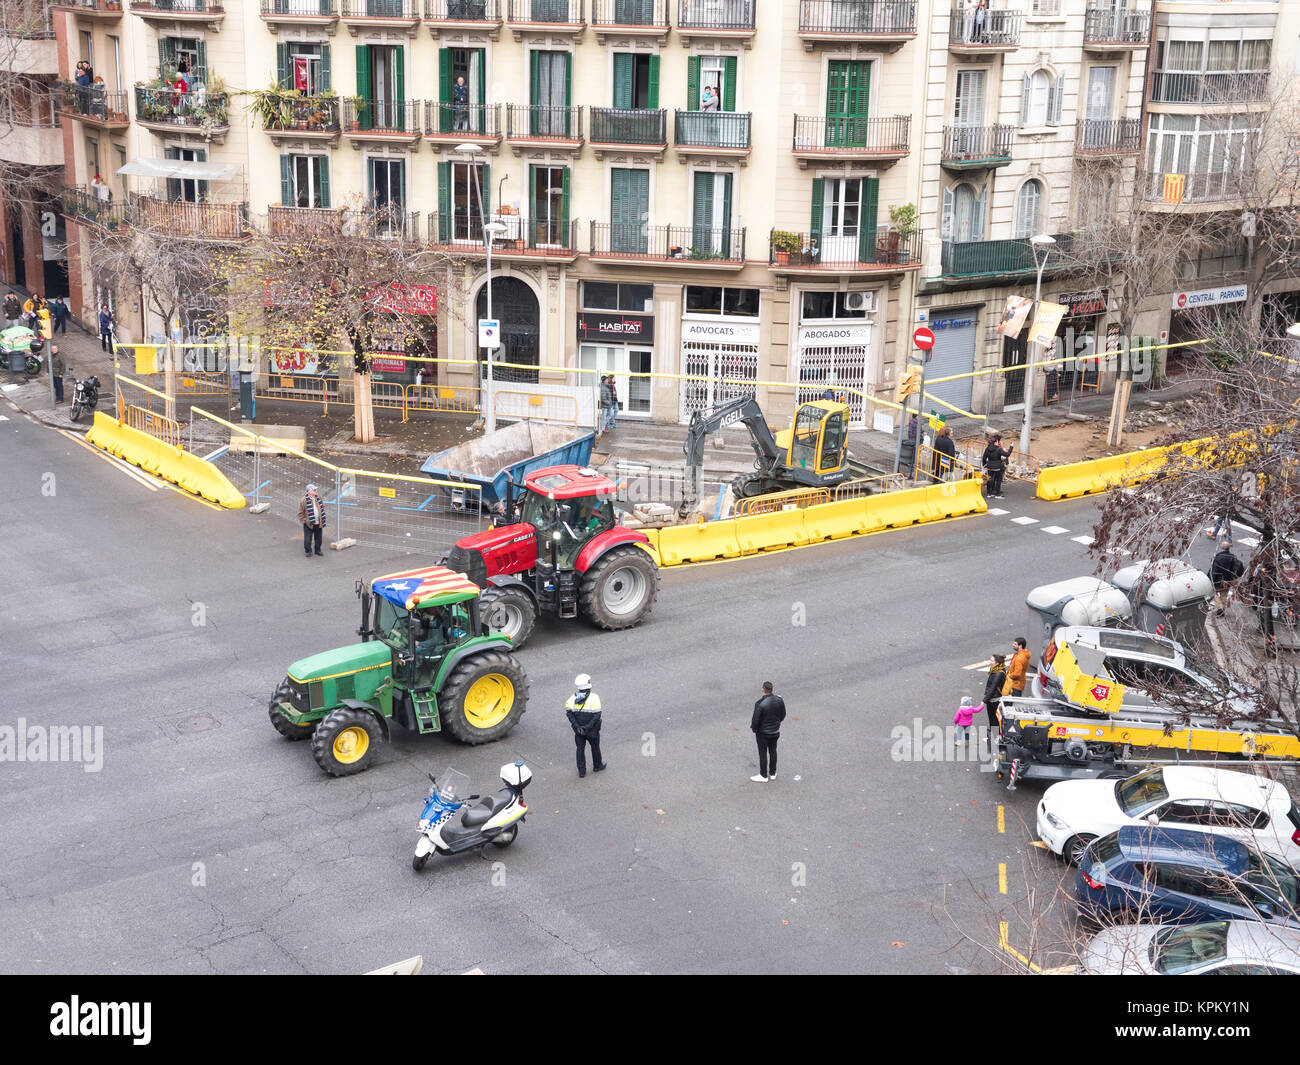 Barcelona, Spain - January 28, 2017 - Tractors marching in the middle of the city of Barcelona Stock Photo